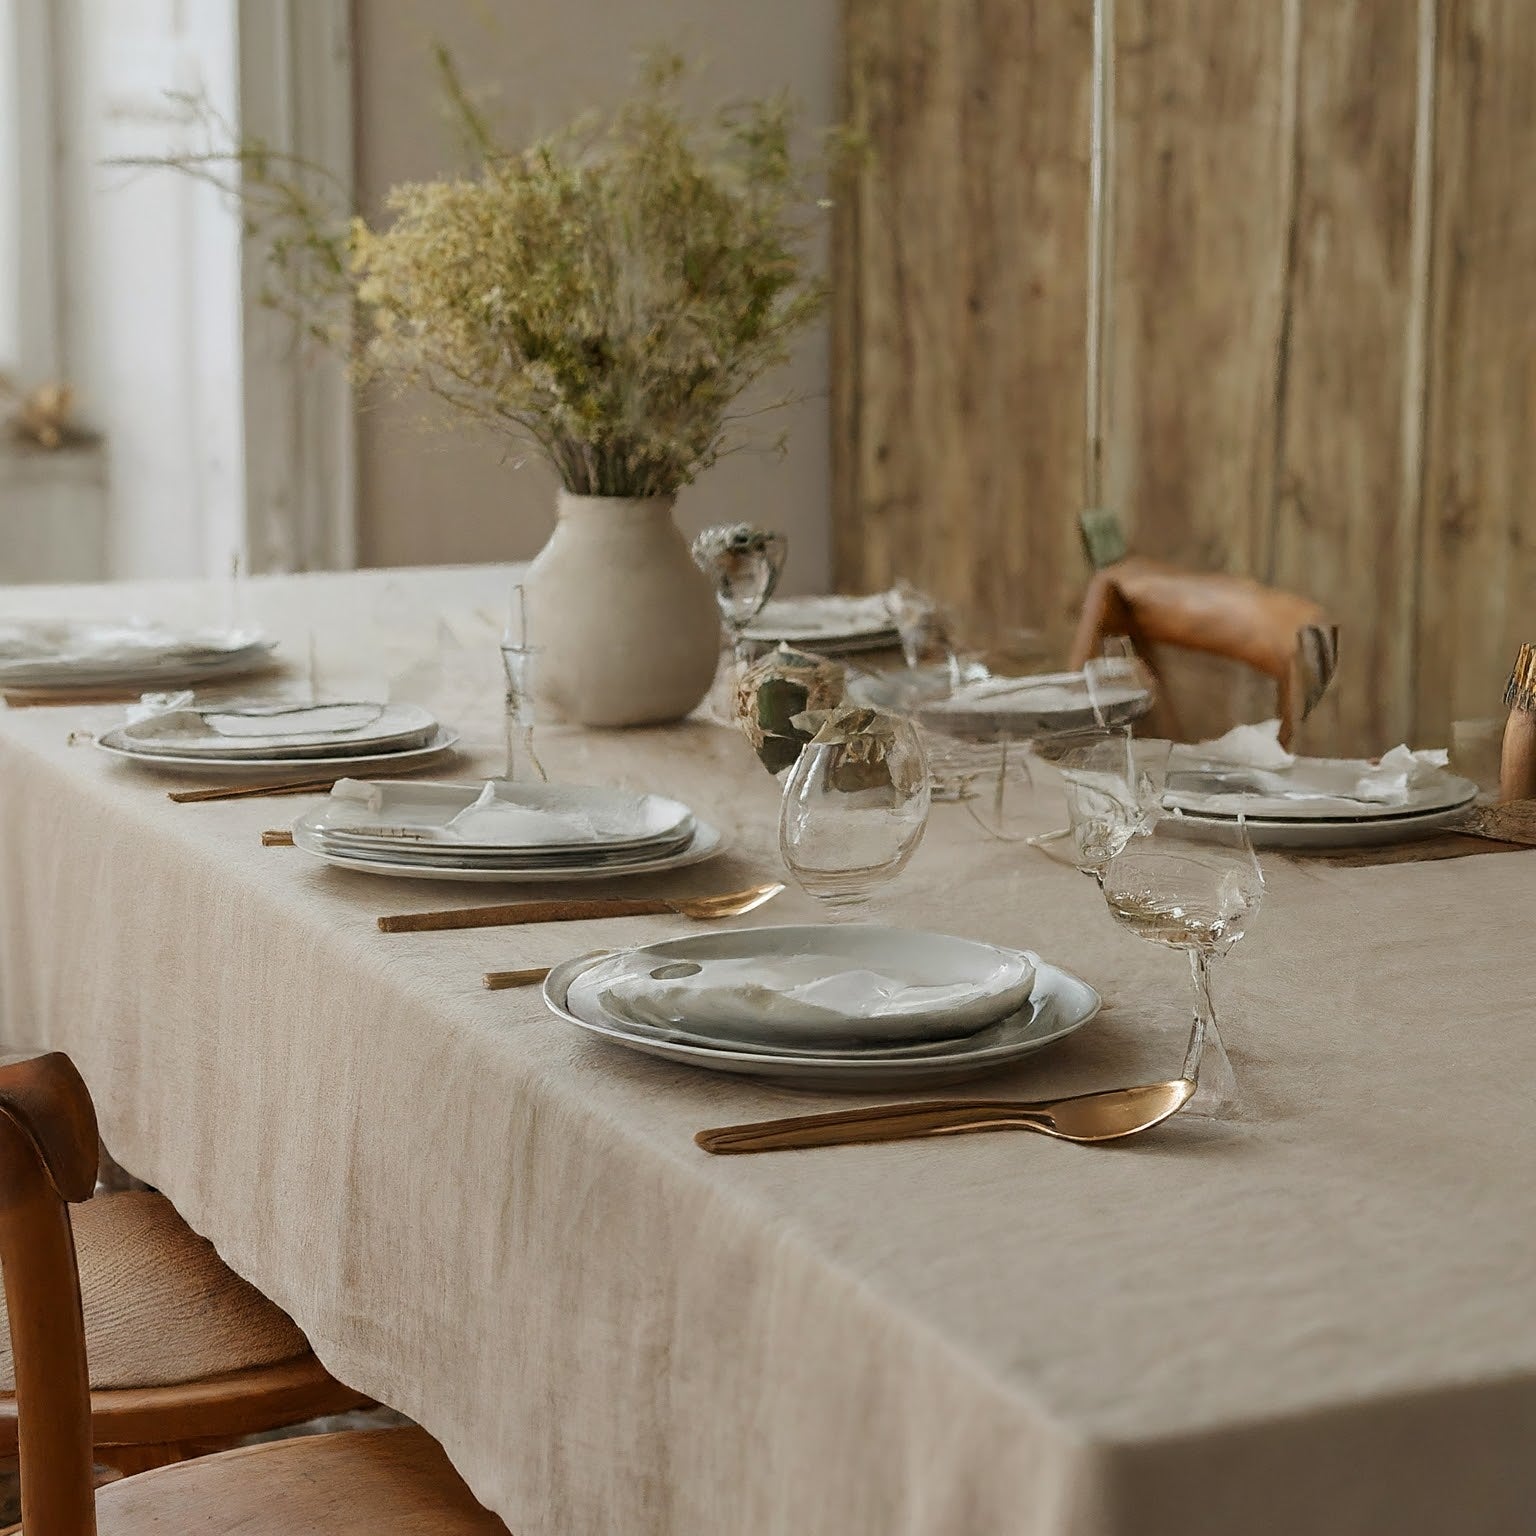 How To Keep Linen Tablecloths From Wrinkling